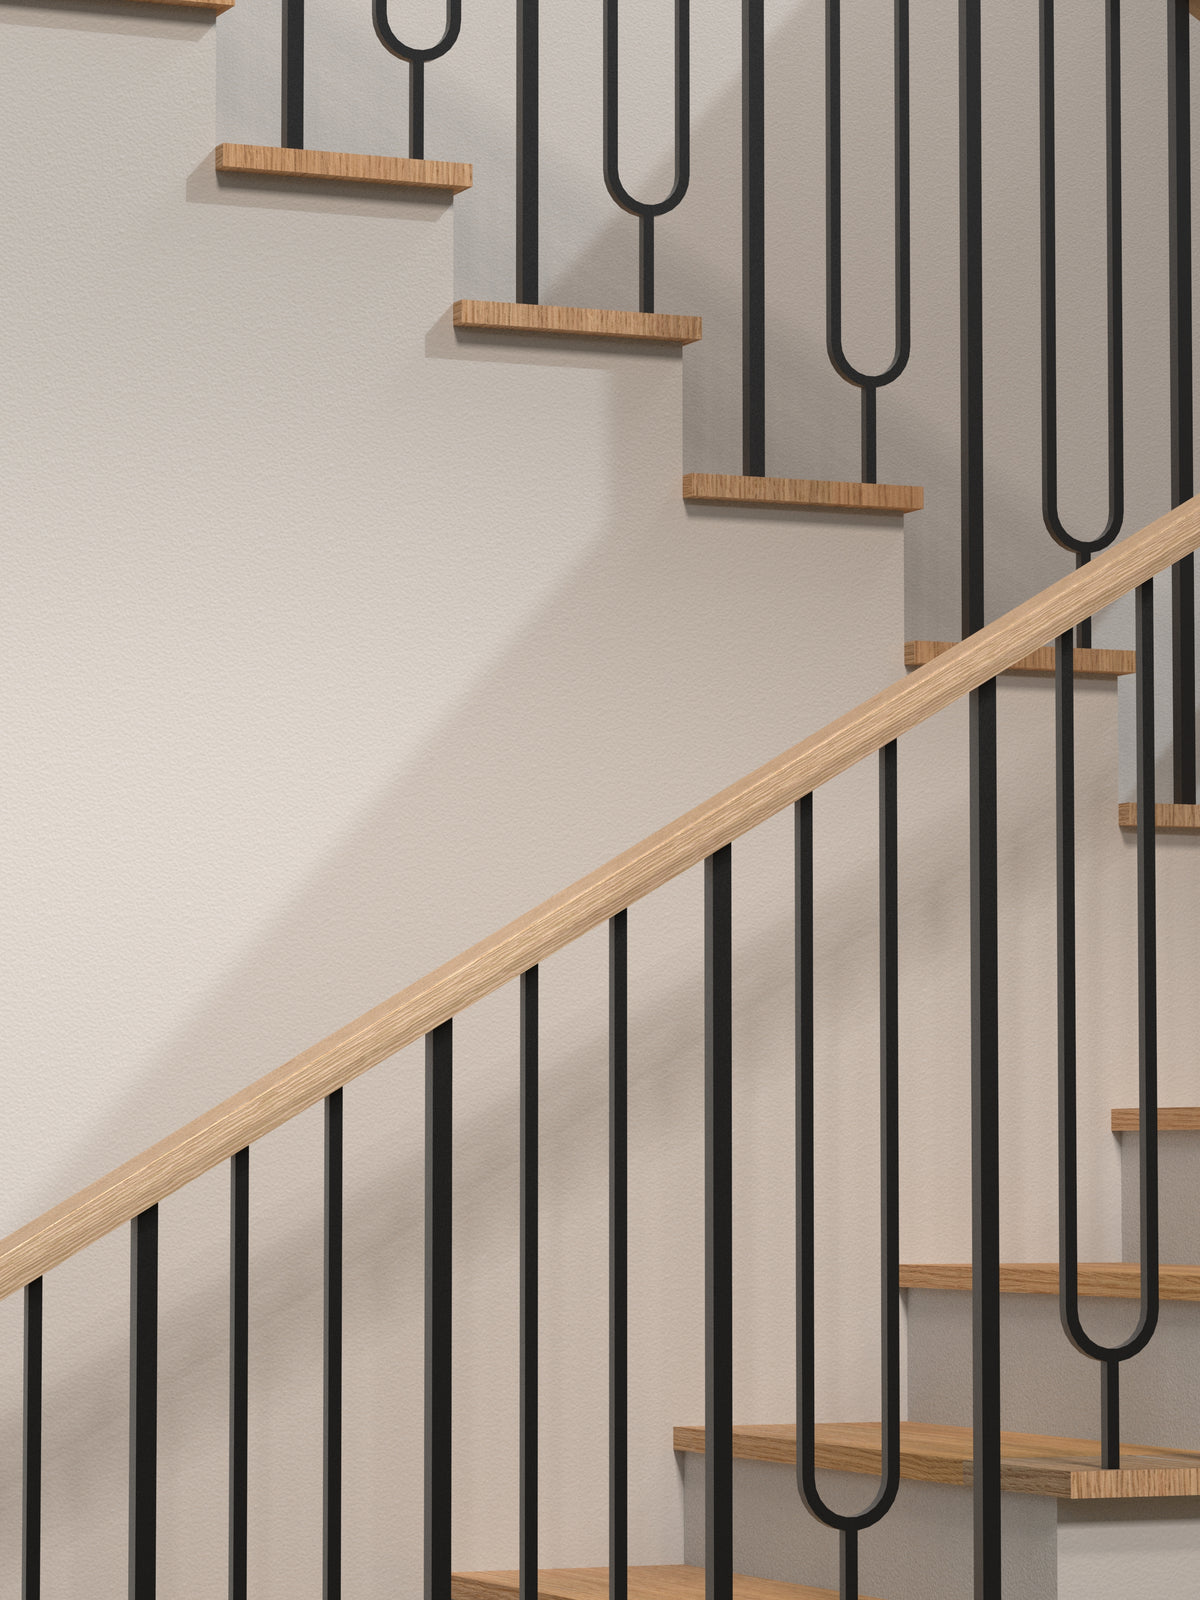 Quality Stair Parts: Choose Your Stair Part Manufacturer Wisely